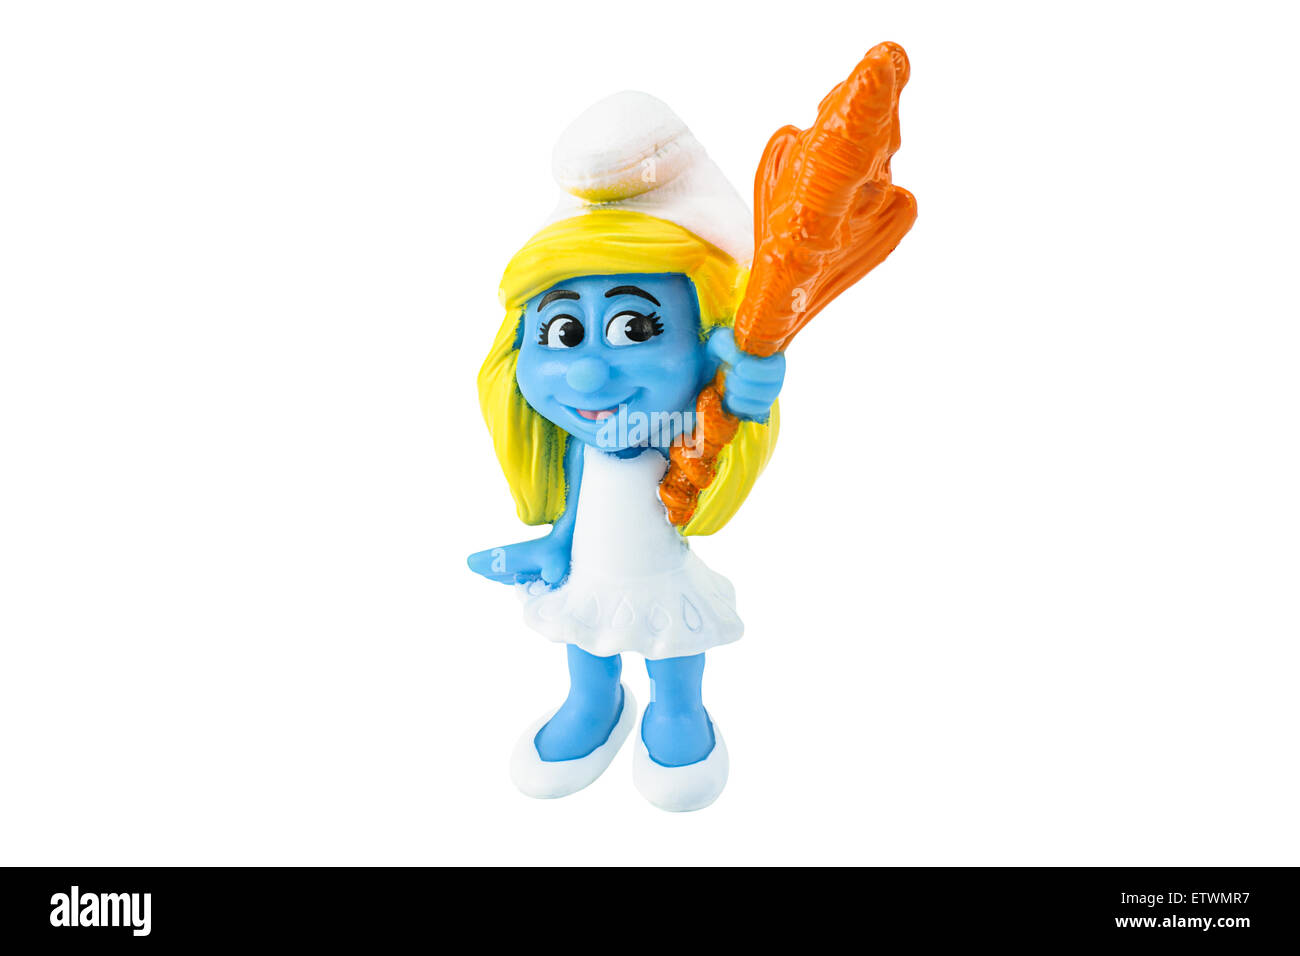 Bangkok,Thailand - February 17, 2014: Smurfette is a female Smurf who was created by Gargamel toy figure model. Stock Photo